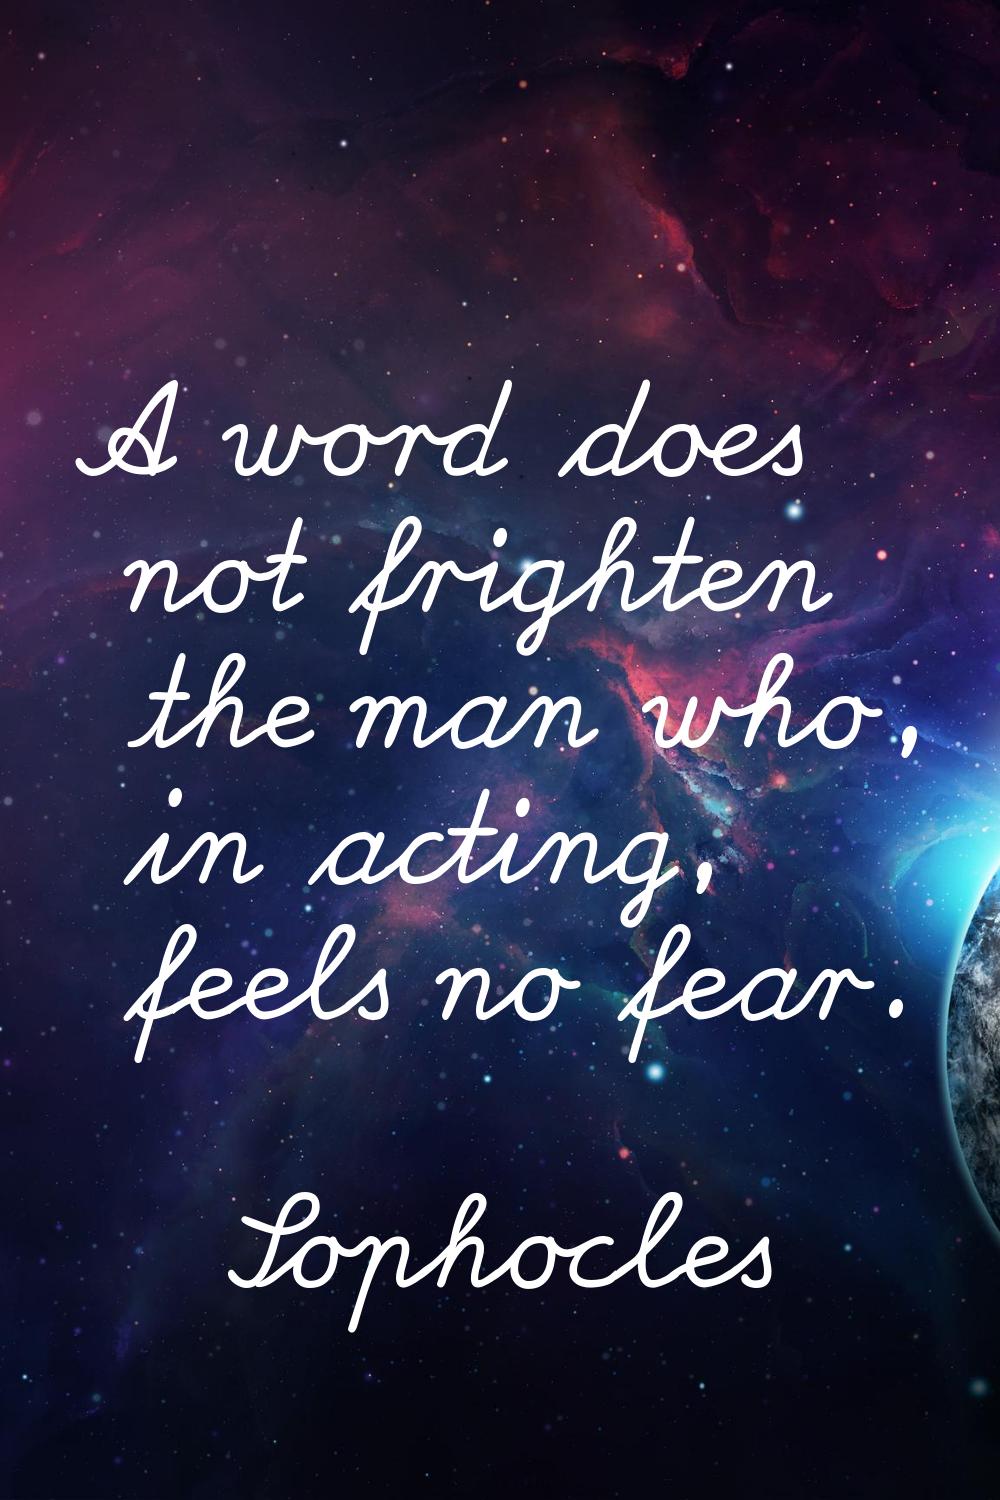 A word does not frighten the man who, in acting, feels no fear.